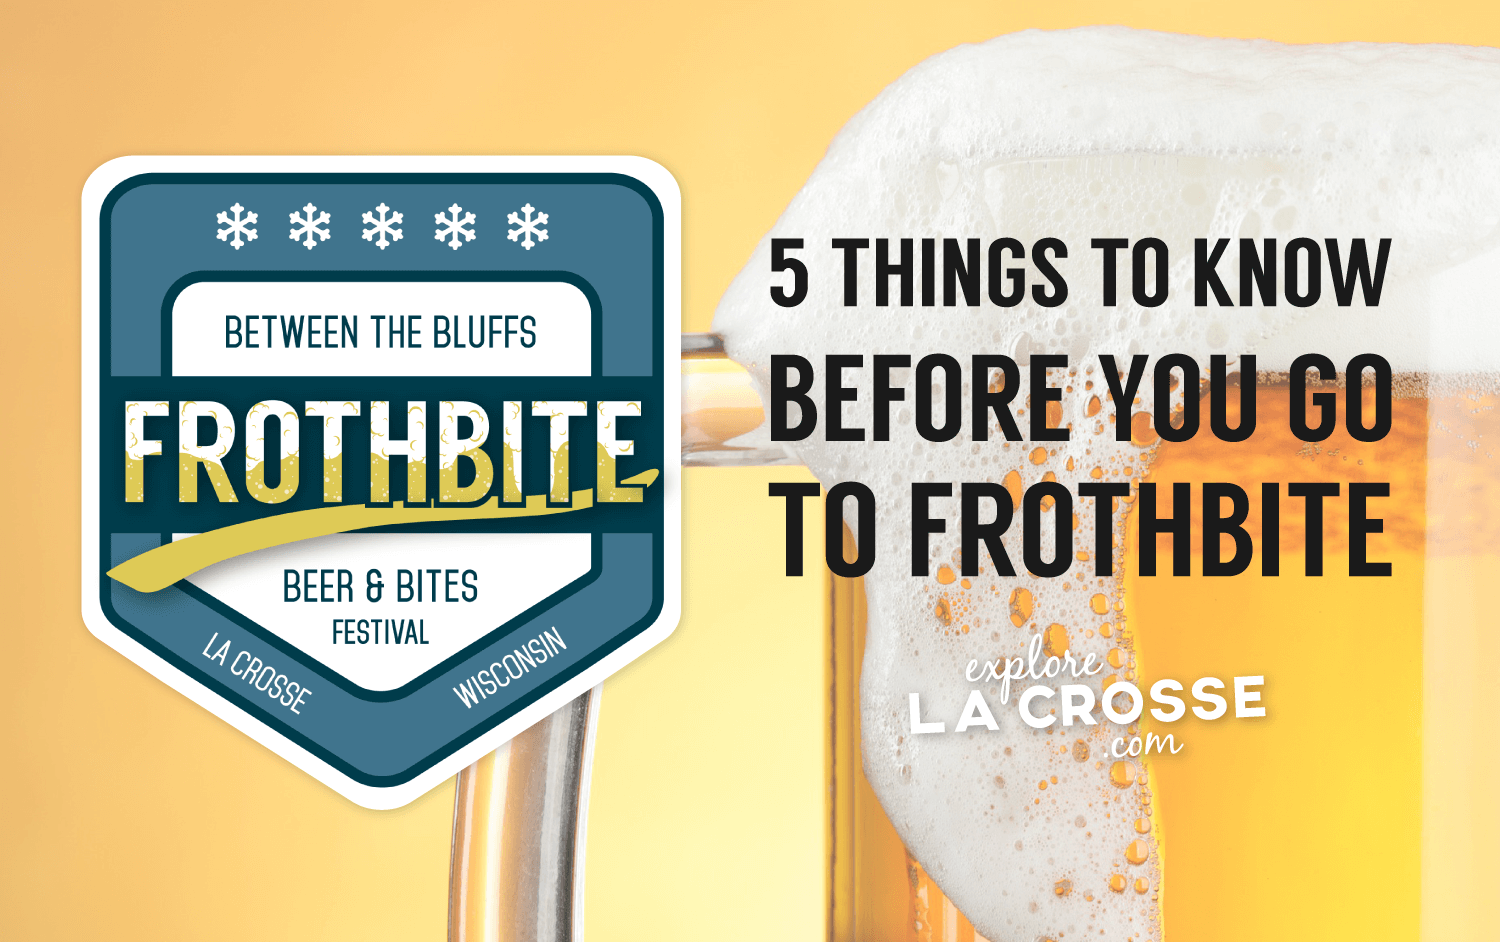 5 Things To Know Before You Go- Frothbite Beer & Bites Festival